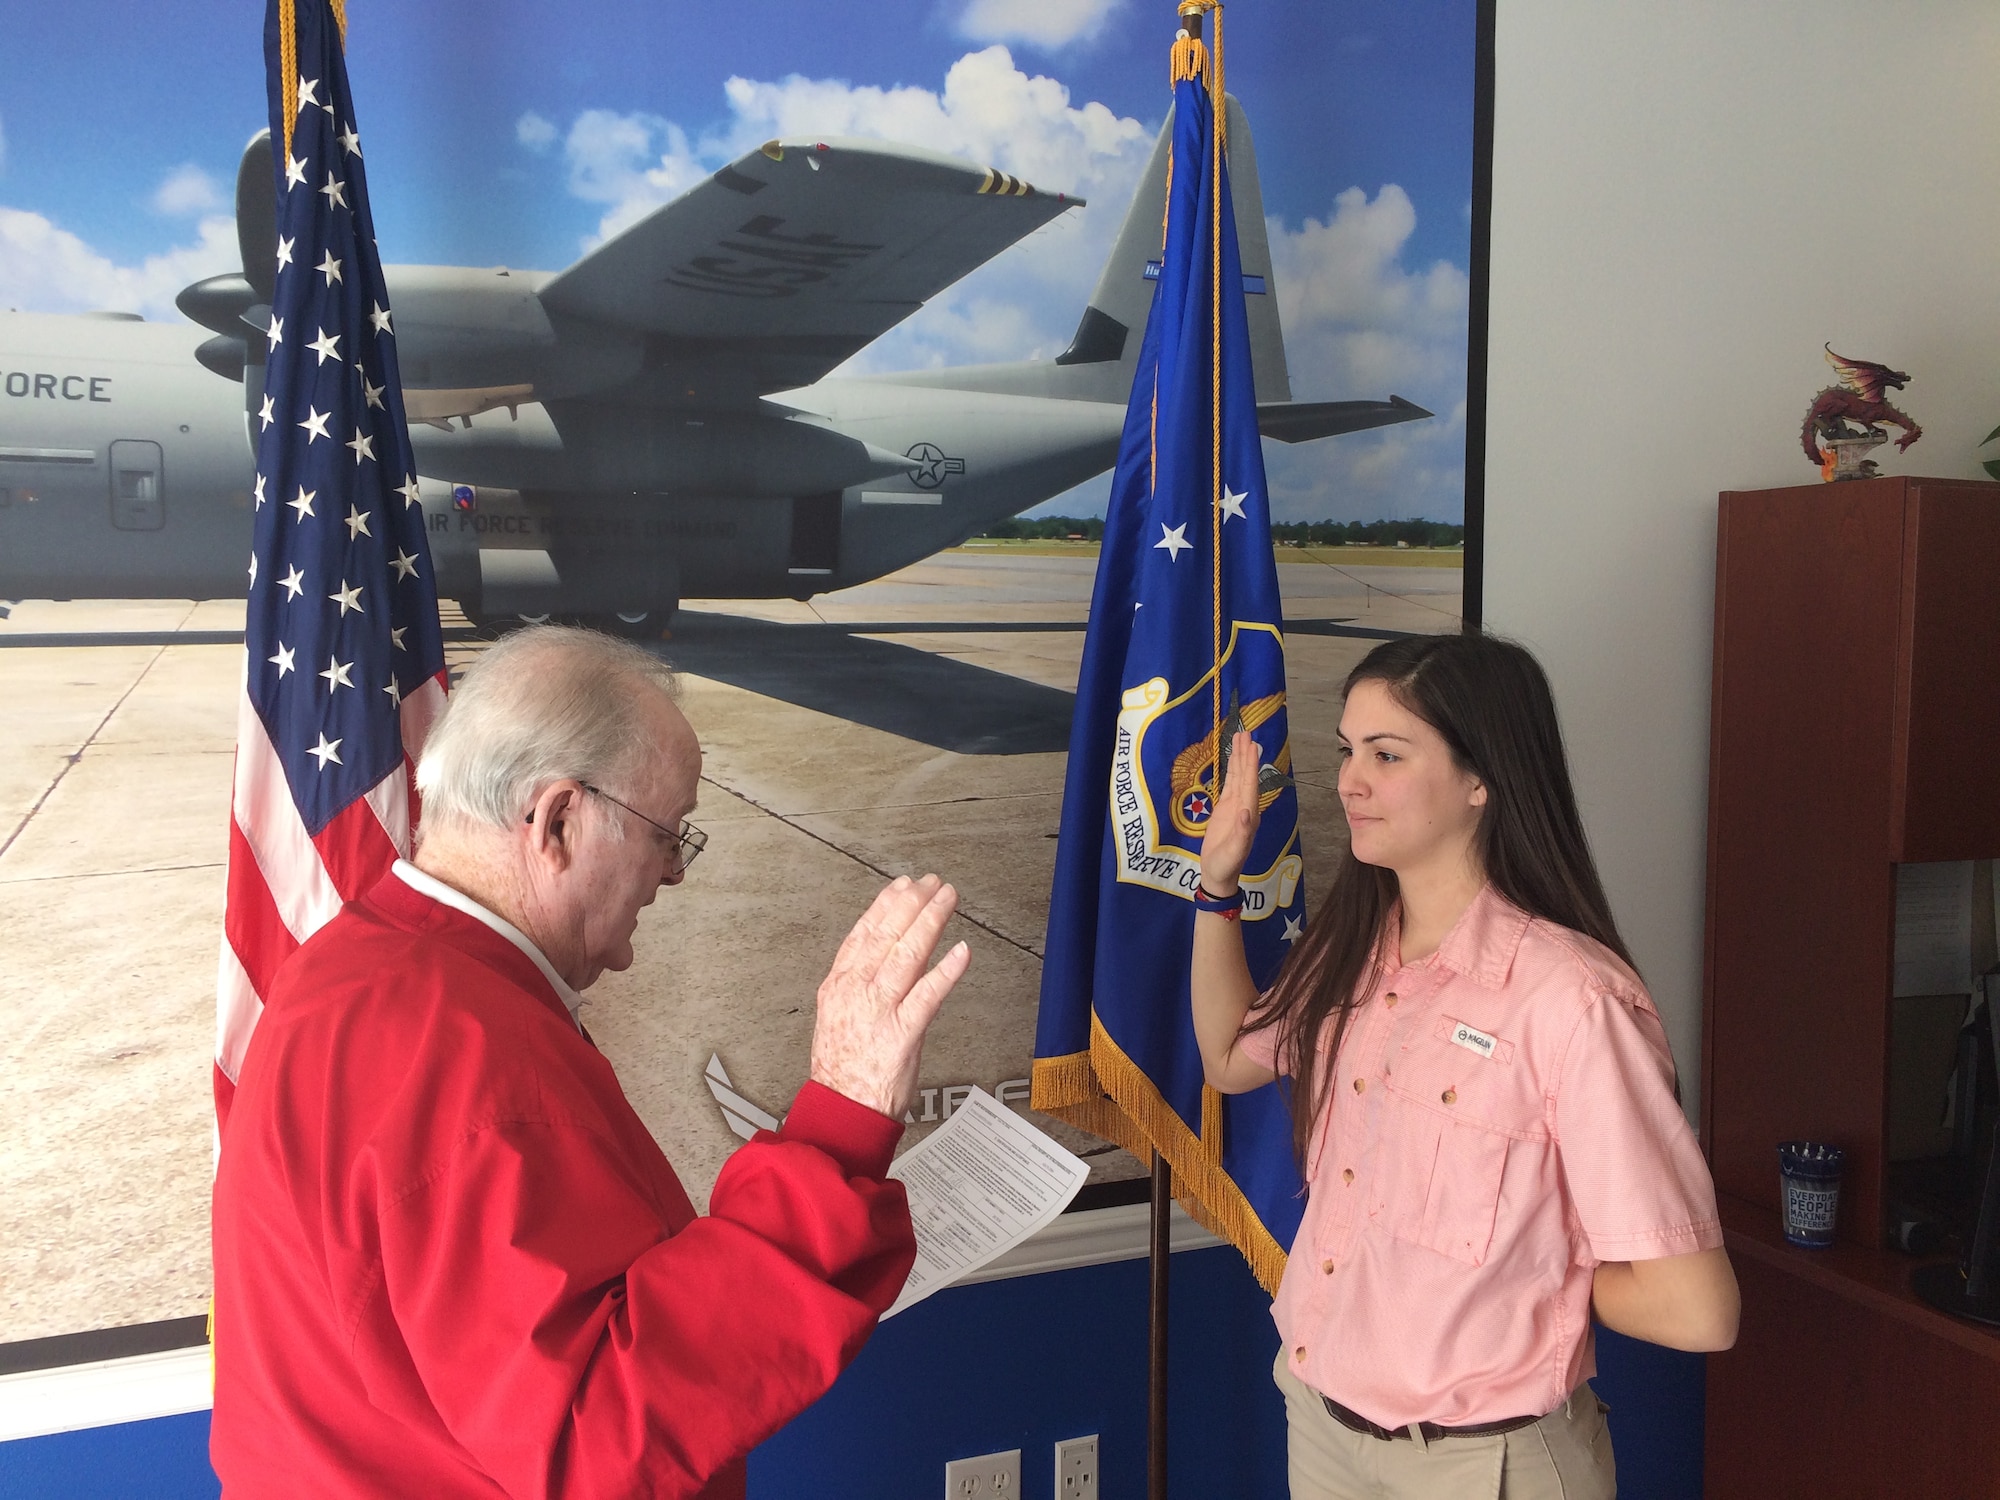 Kristen Pittman performs the oath of enlistment at the Air Force Reserve recruiting office in Hattiesburg, Miss., Jan. 30, 2017. (Courtesy photo)